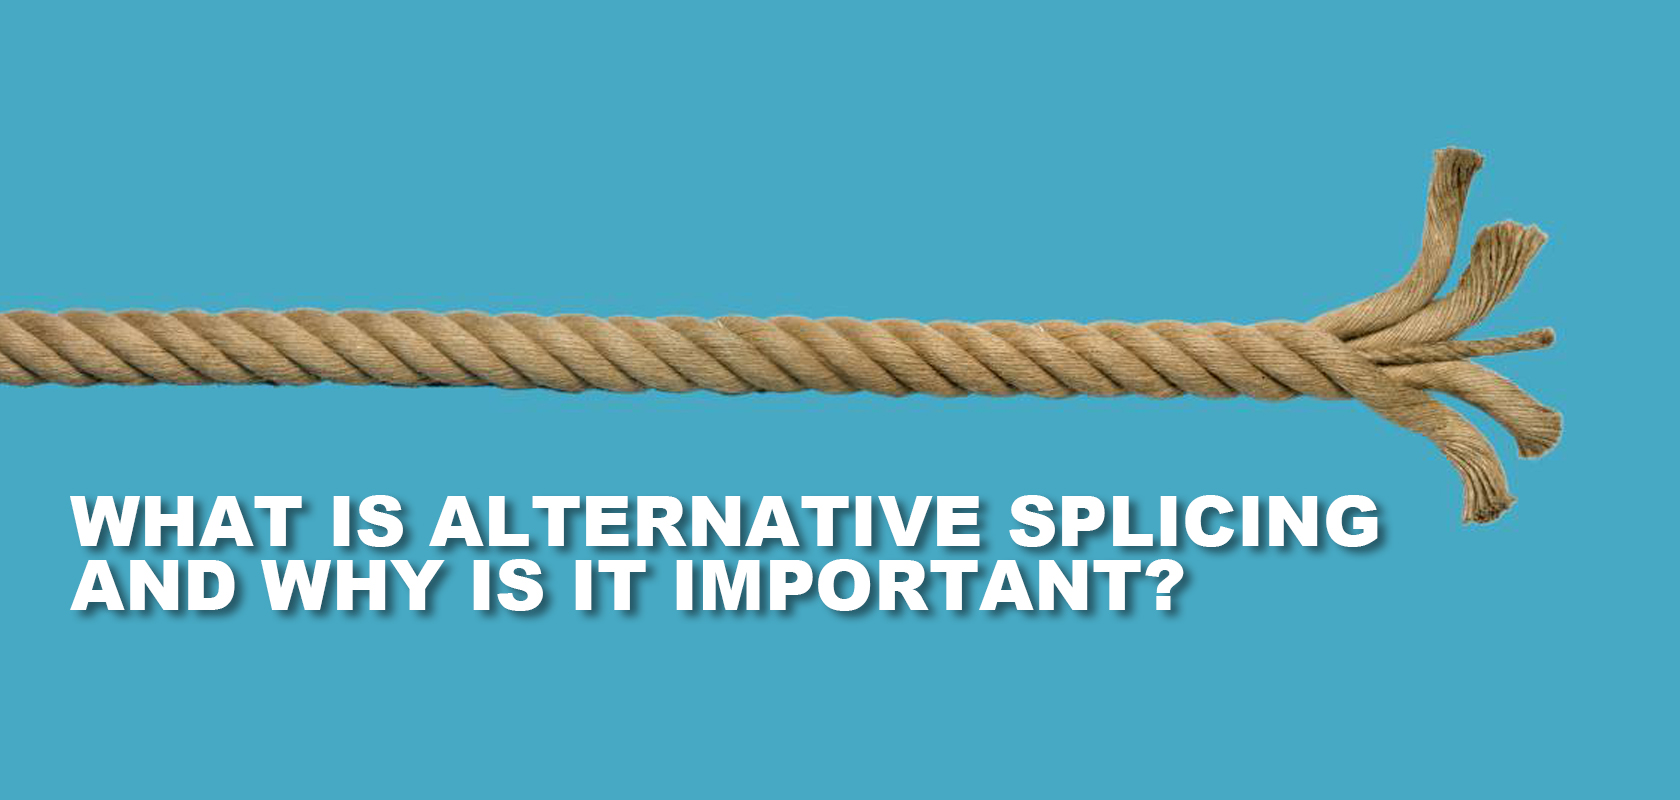 WHAT IS ALTERNATIVE SPLICING AND WHY IS IT IMPORTANT?